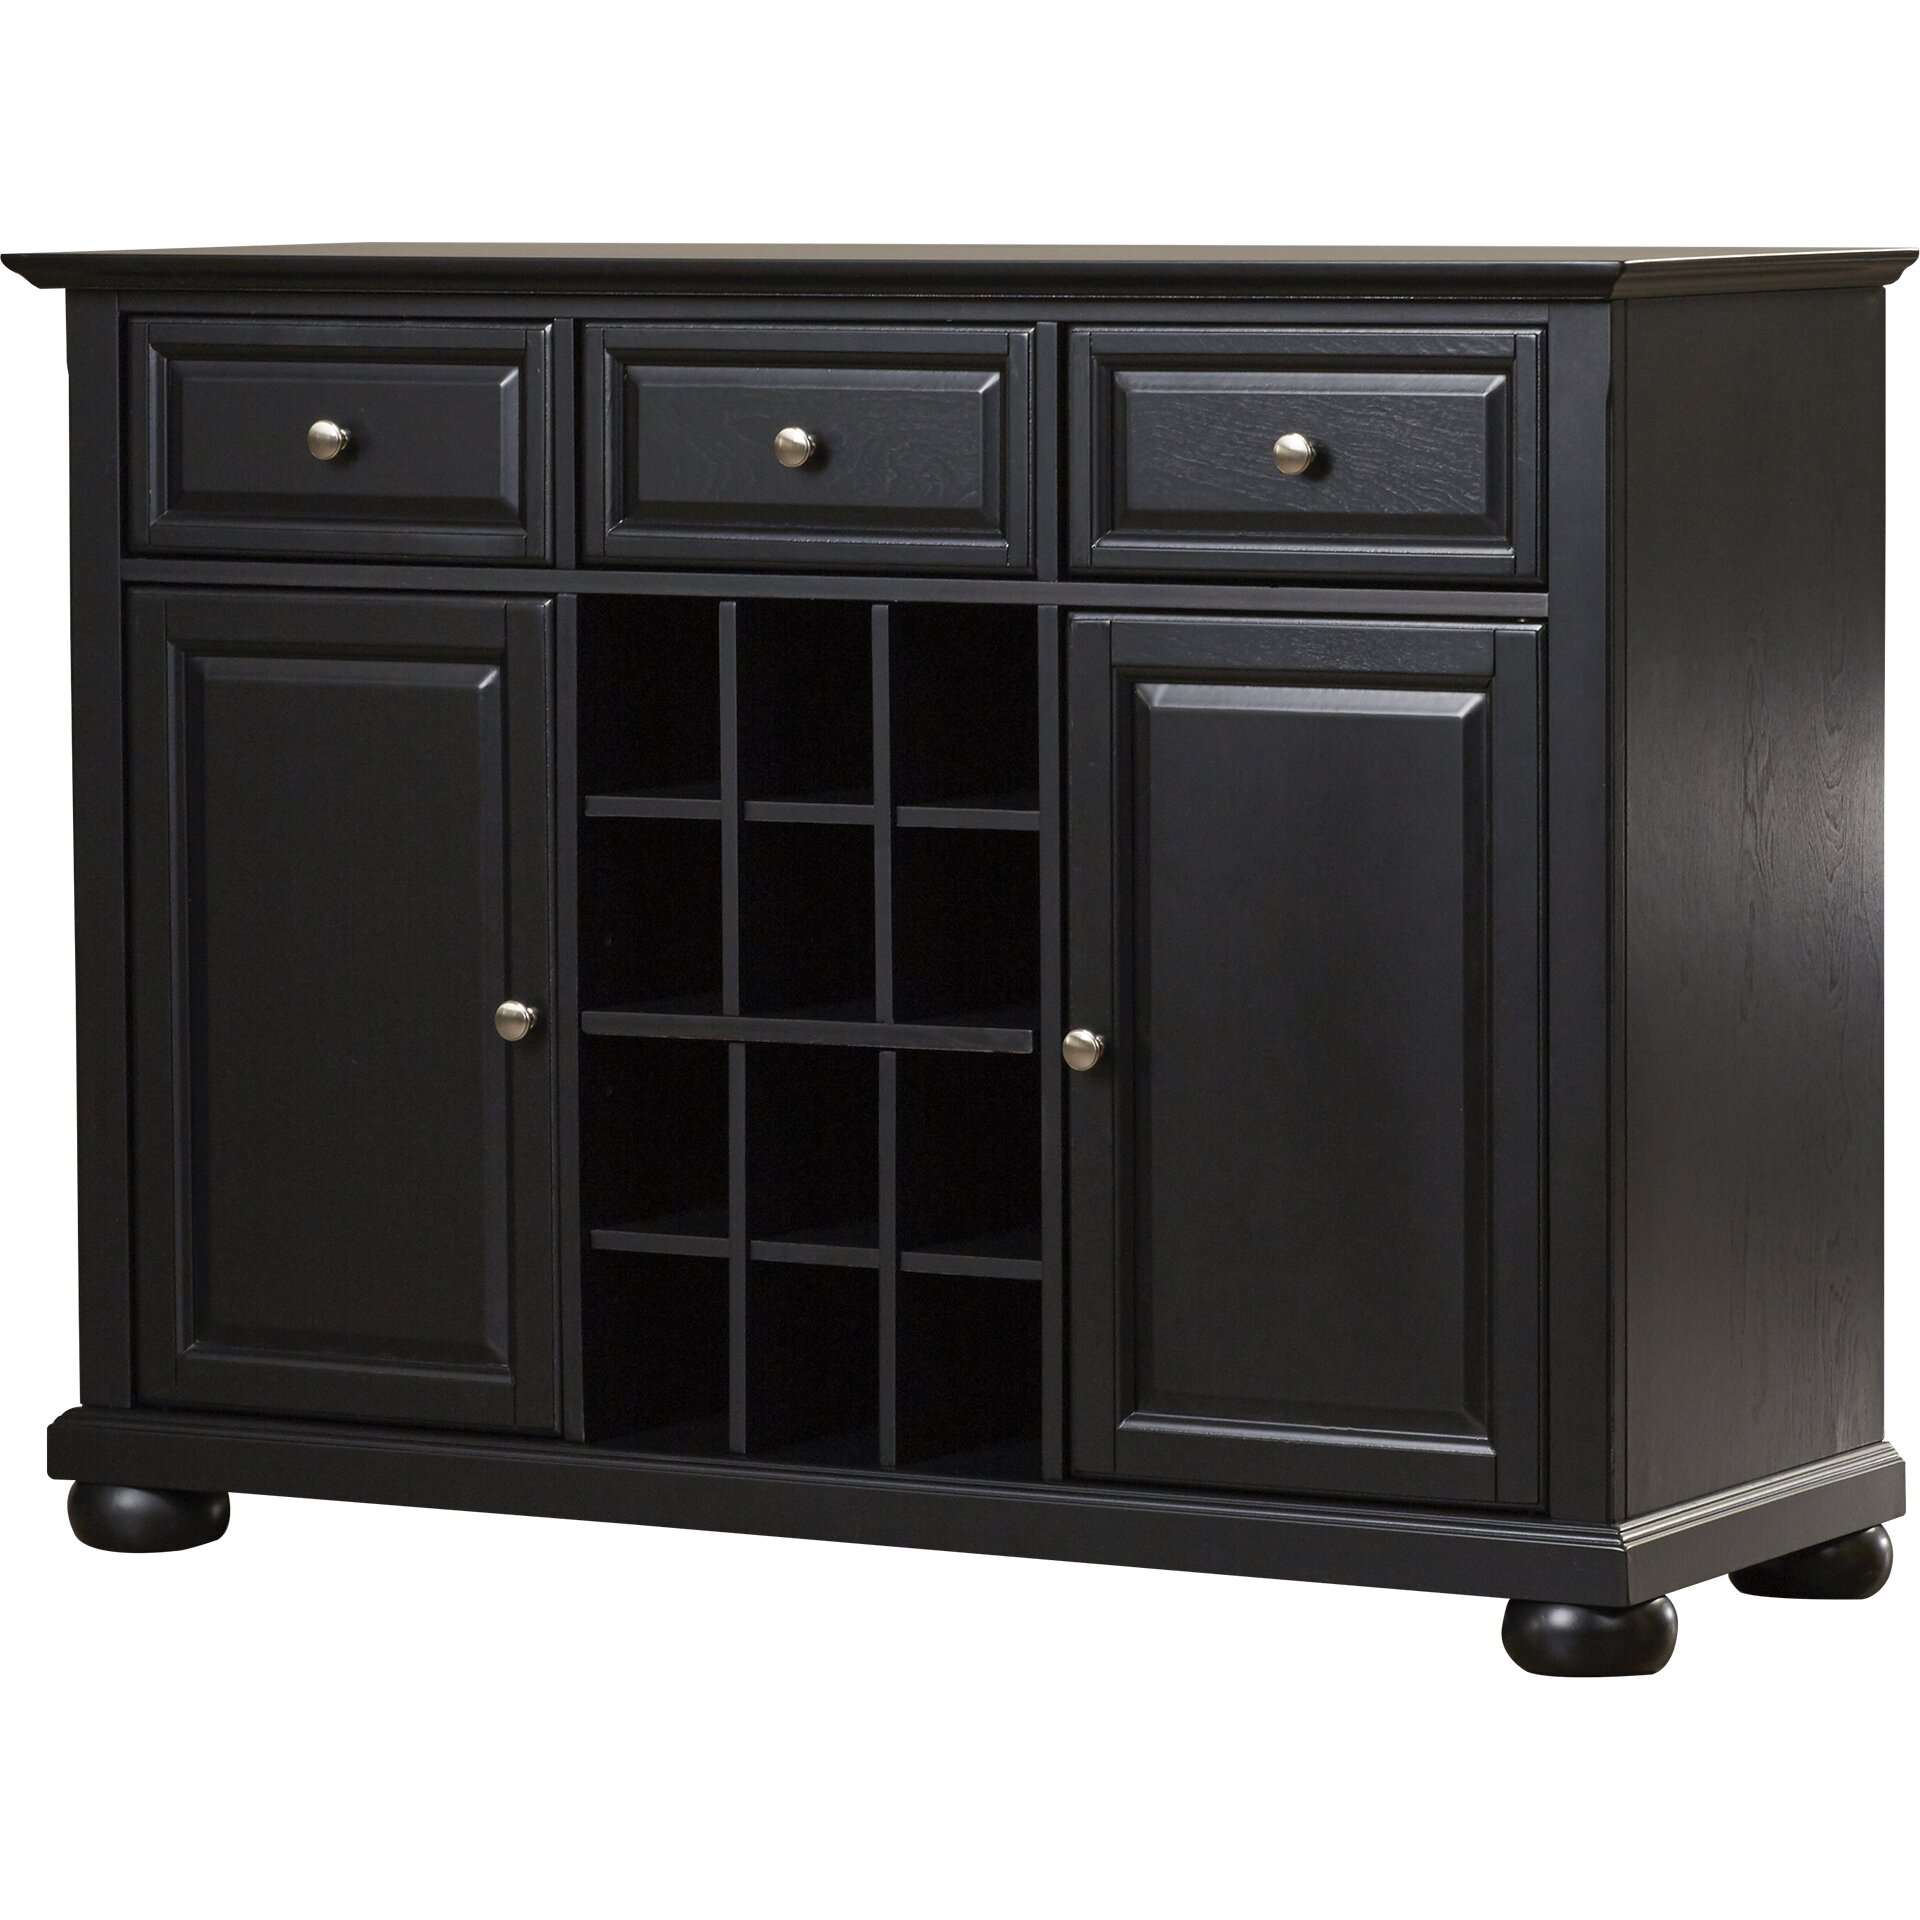 Darby Home Co Pottstown Buffet Server Sideboard Cabinet With Wine Storage And Reviews Wayfair